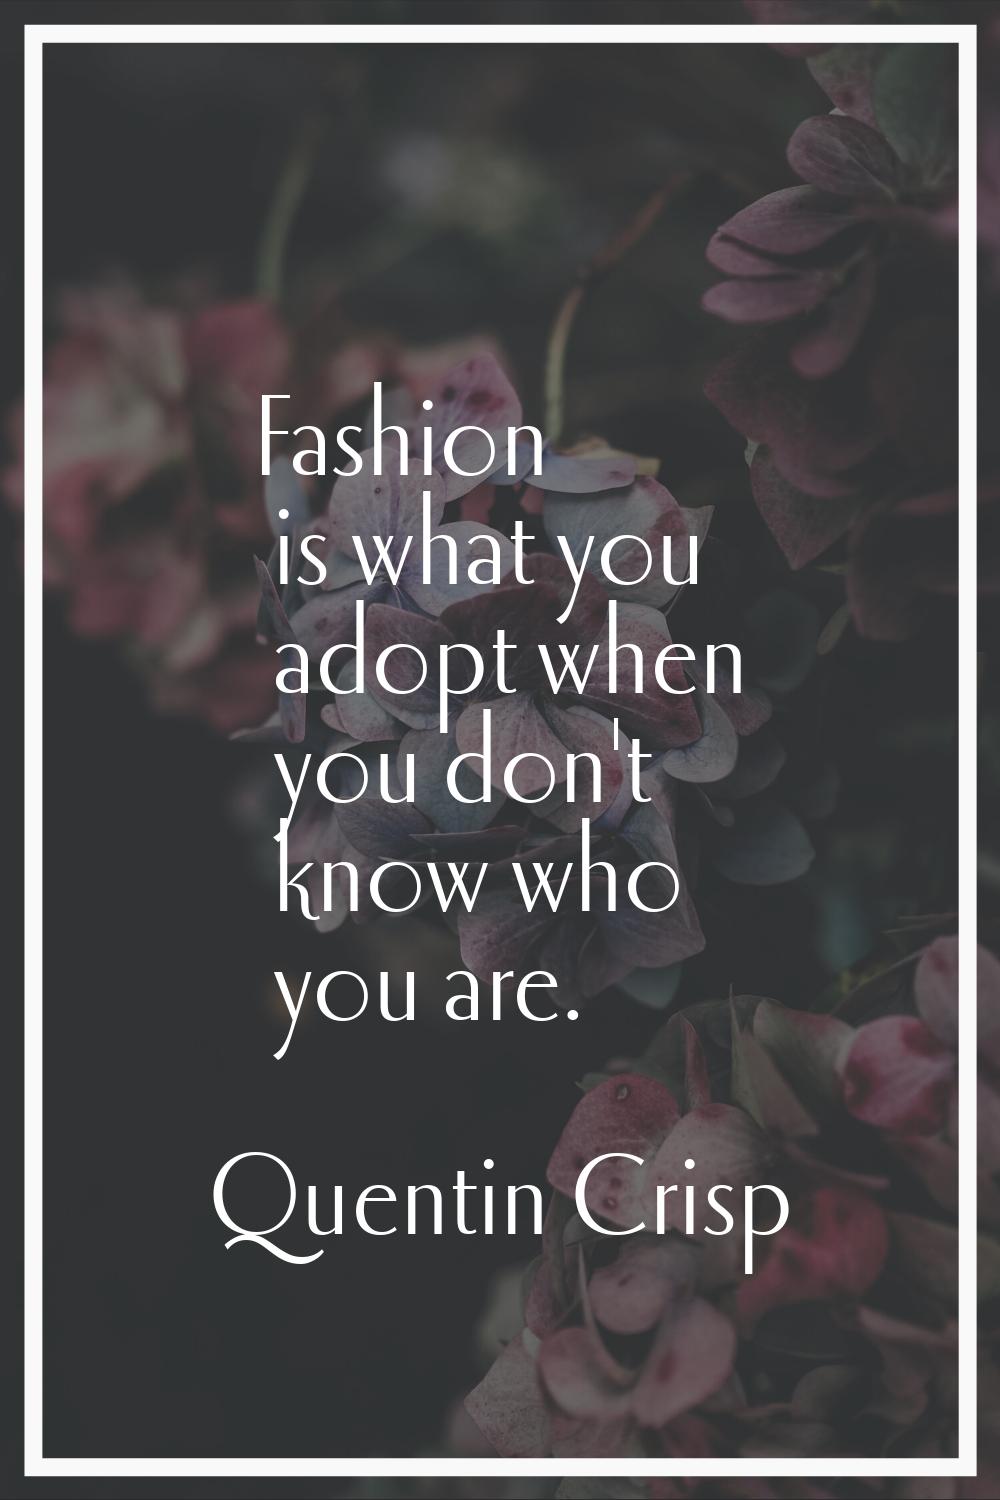 Fashion is what you adopt when you don't know who you are.